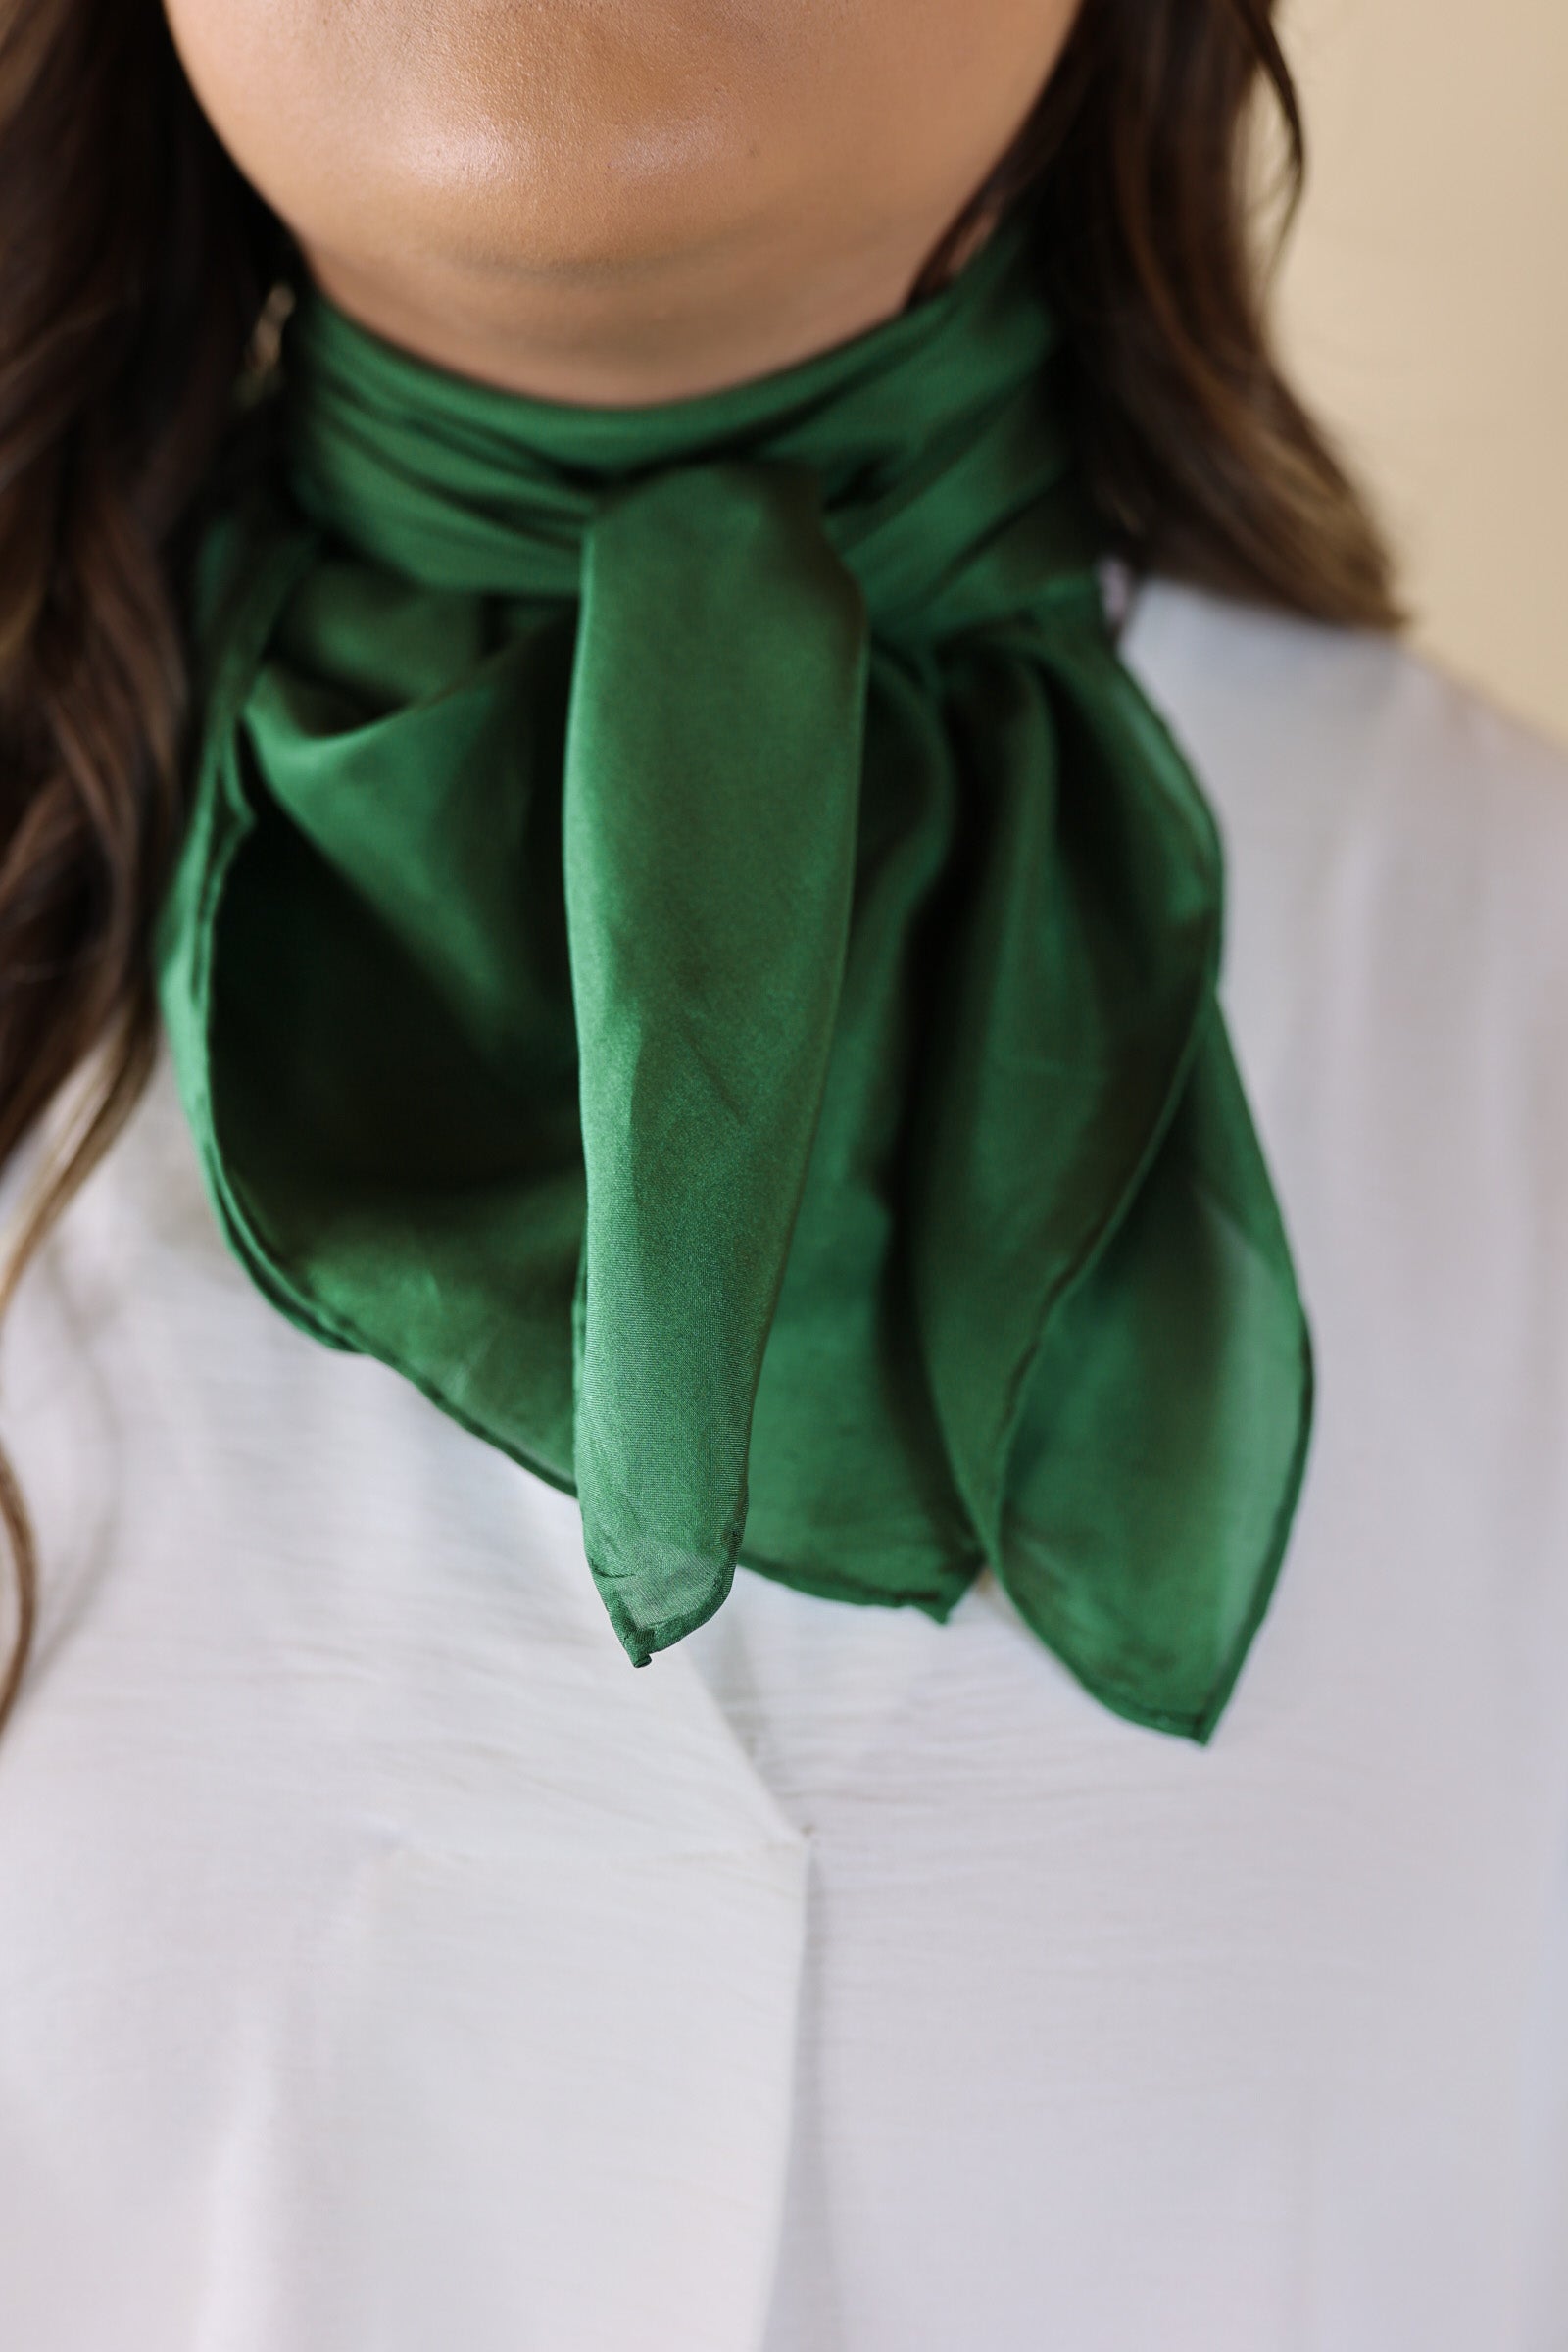 Solid Wild Rag in Eucalyptus Green - Giddy Up Glamour Boutique